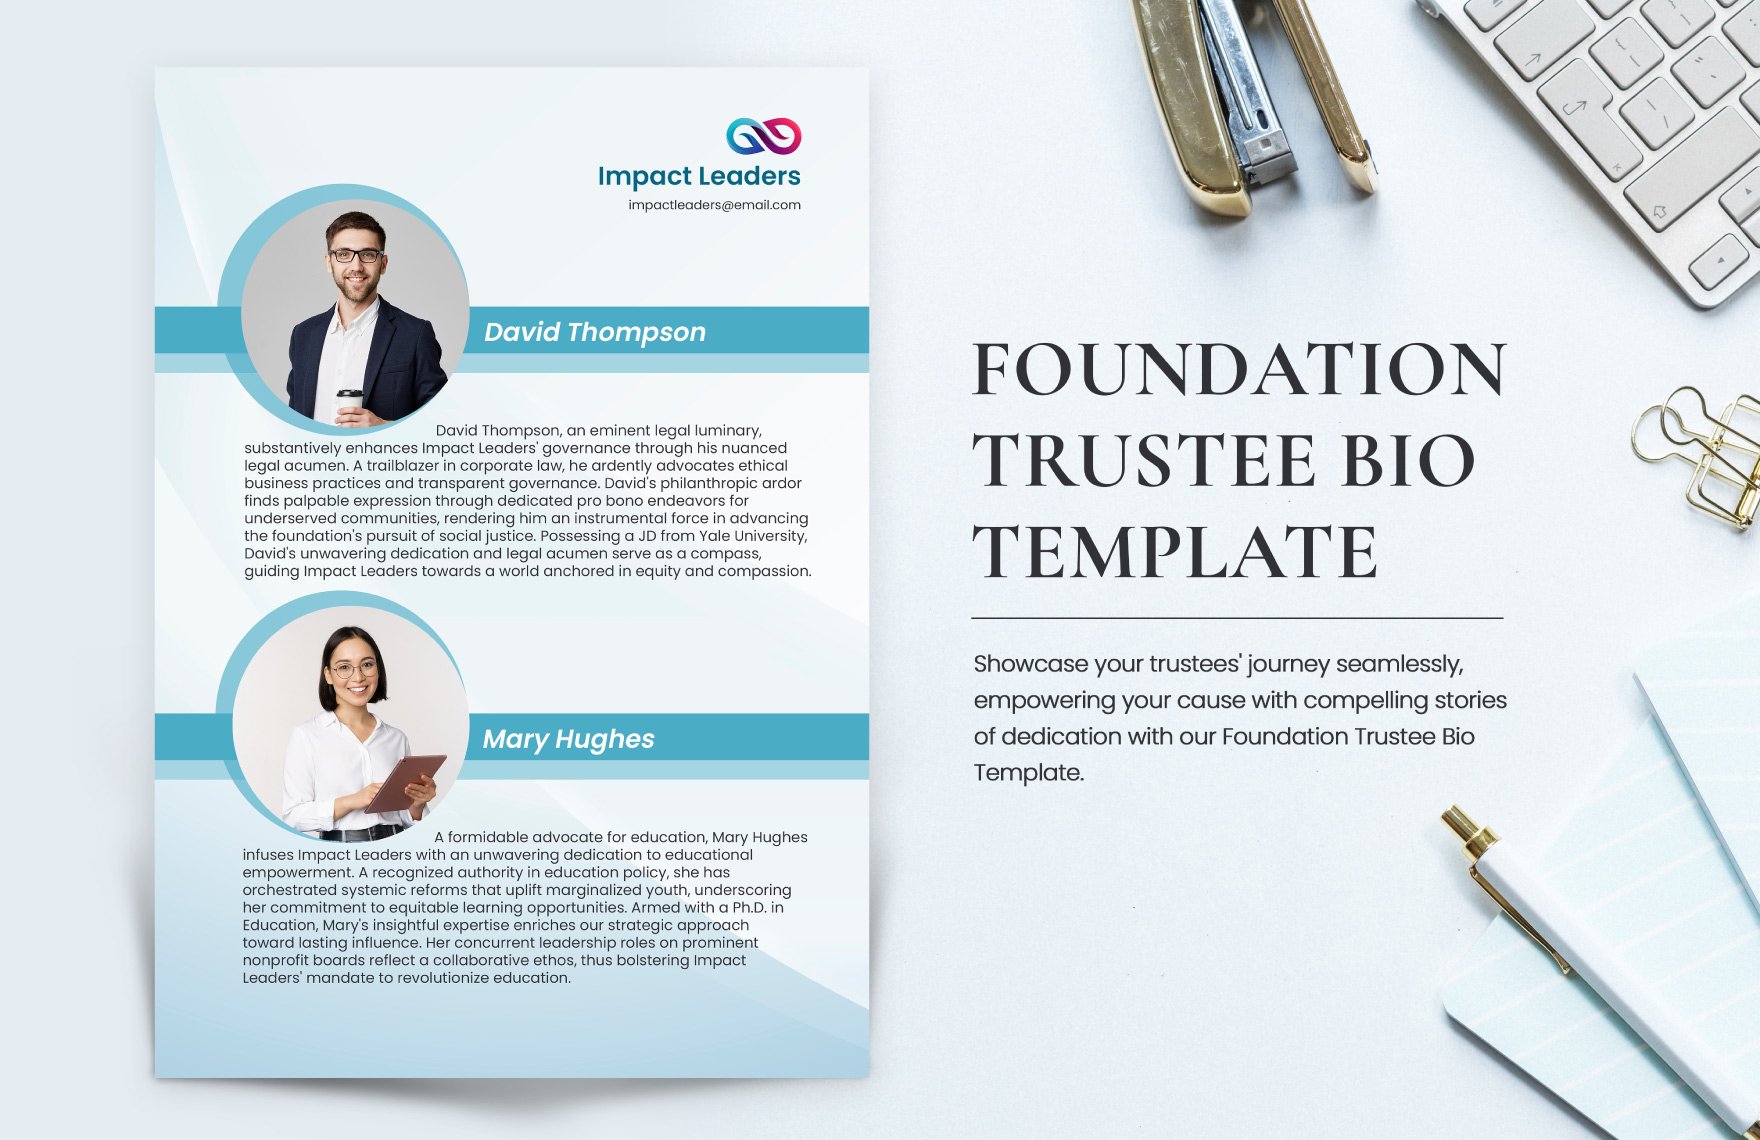 Foundation Trustee Bio Template in Word, Illustrator, PSD, PNG